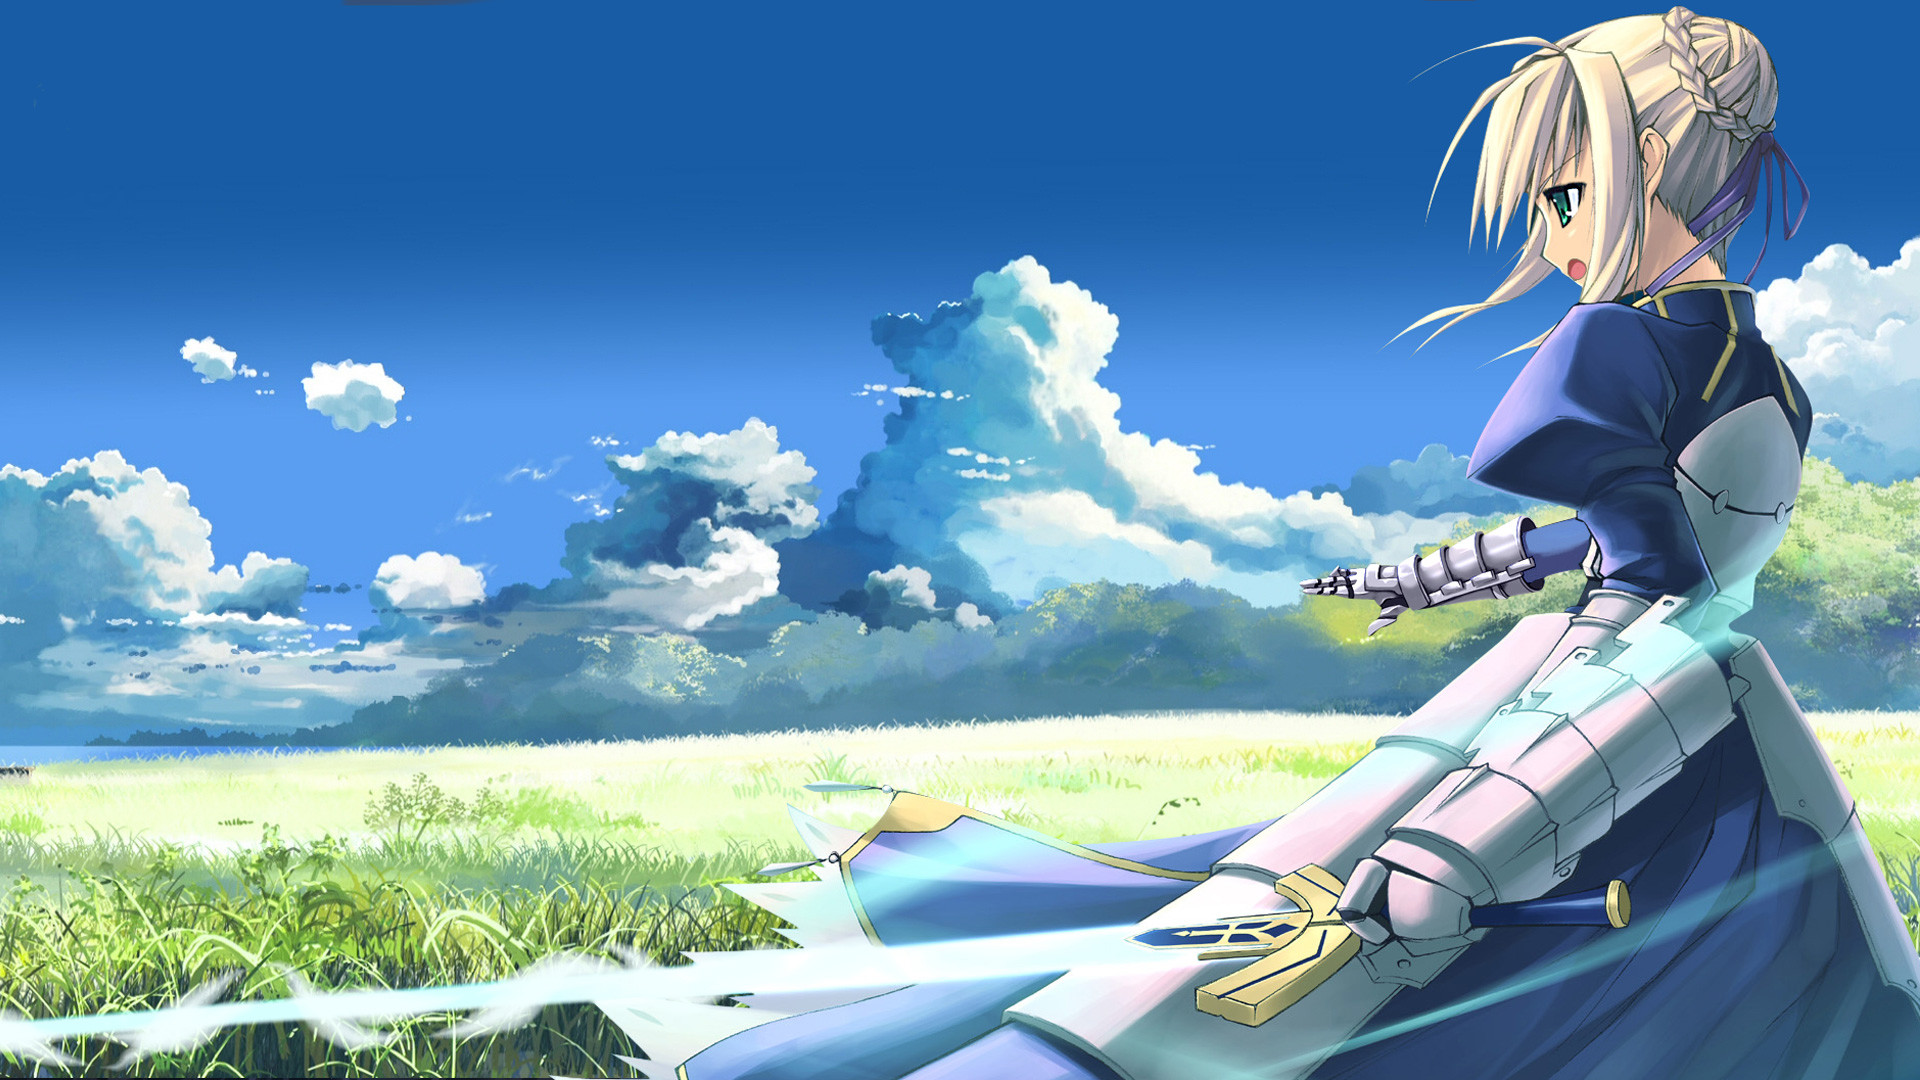 Anime 1920x1080 Resolution Wallpapers Laptop Full HD 1080P